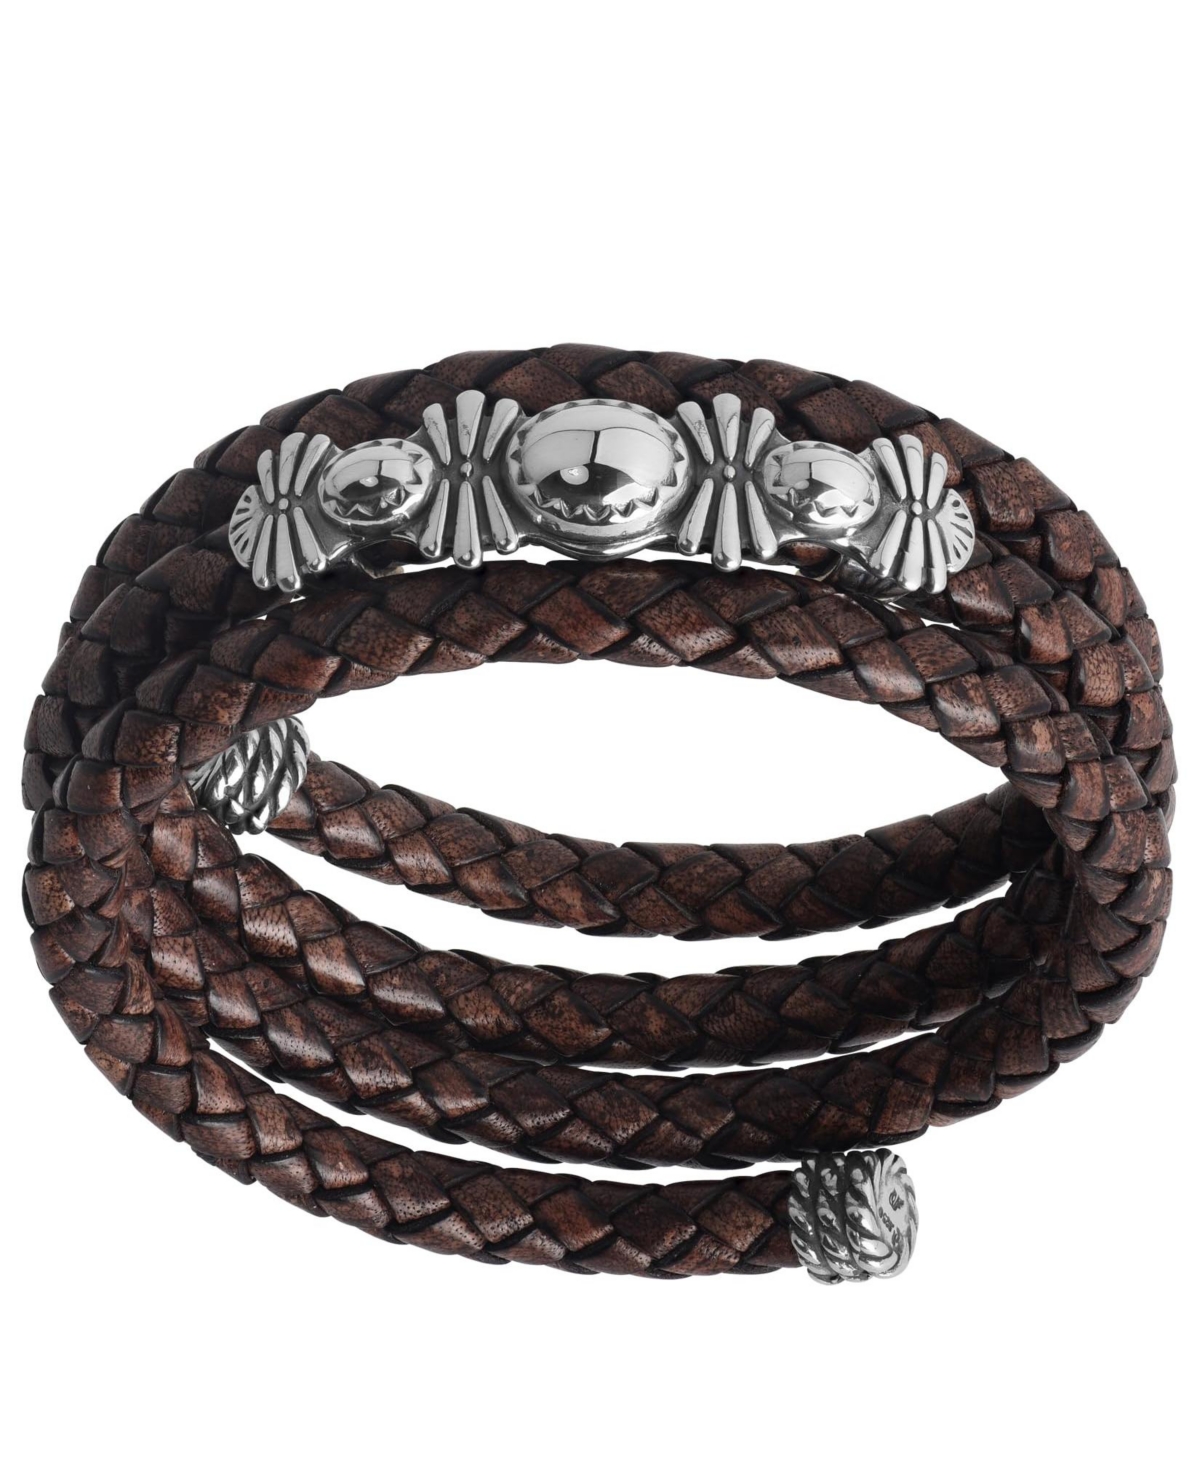 Sterling Silver Wrap Bracelet For Men & Women Silver Beaded Choice of Leather Color One Size Fits Most - Brown